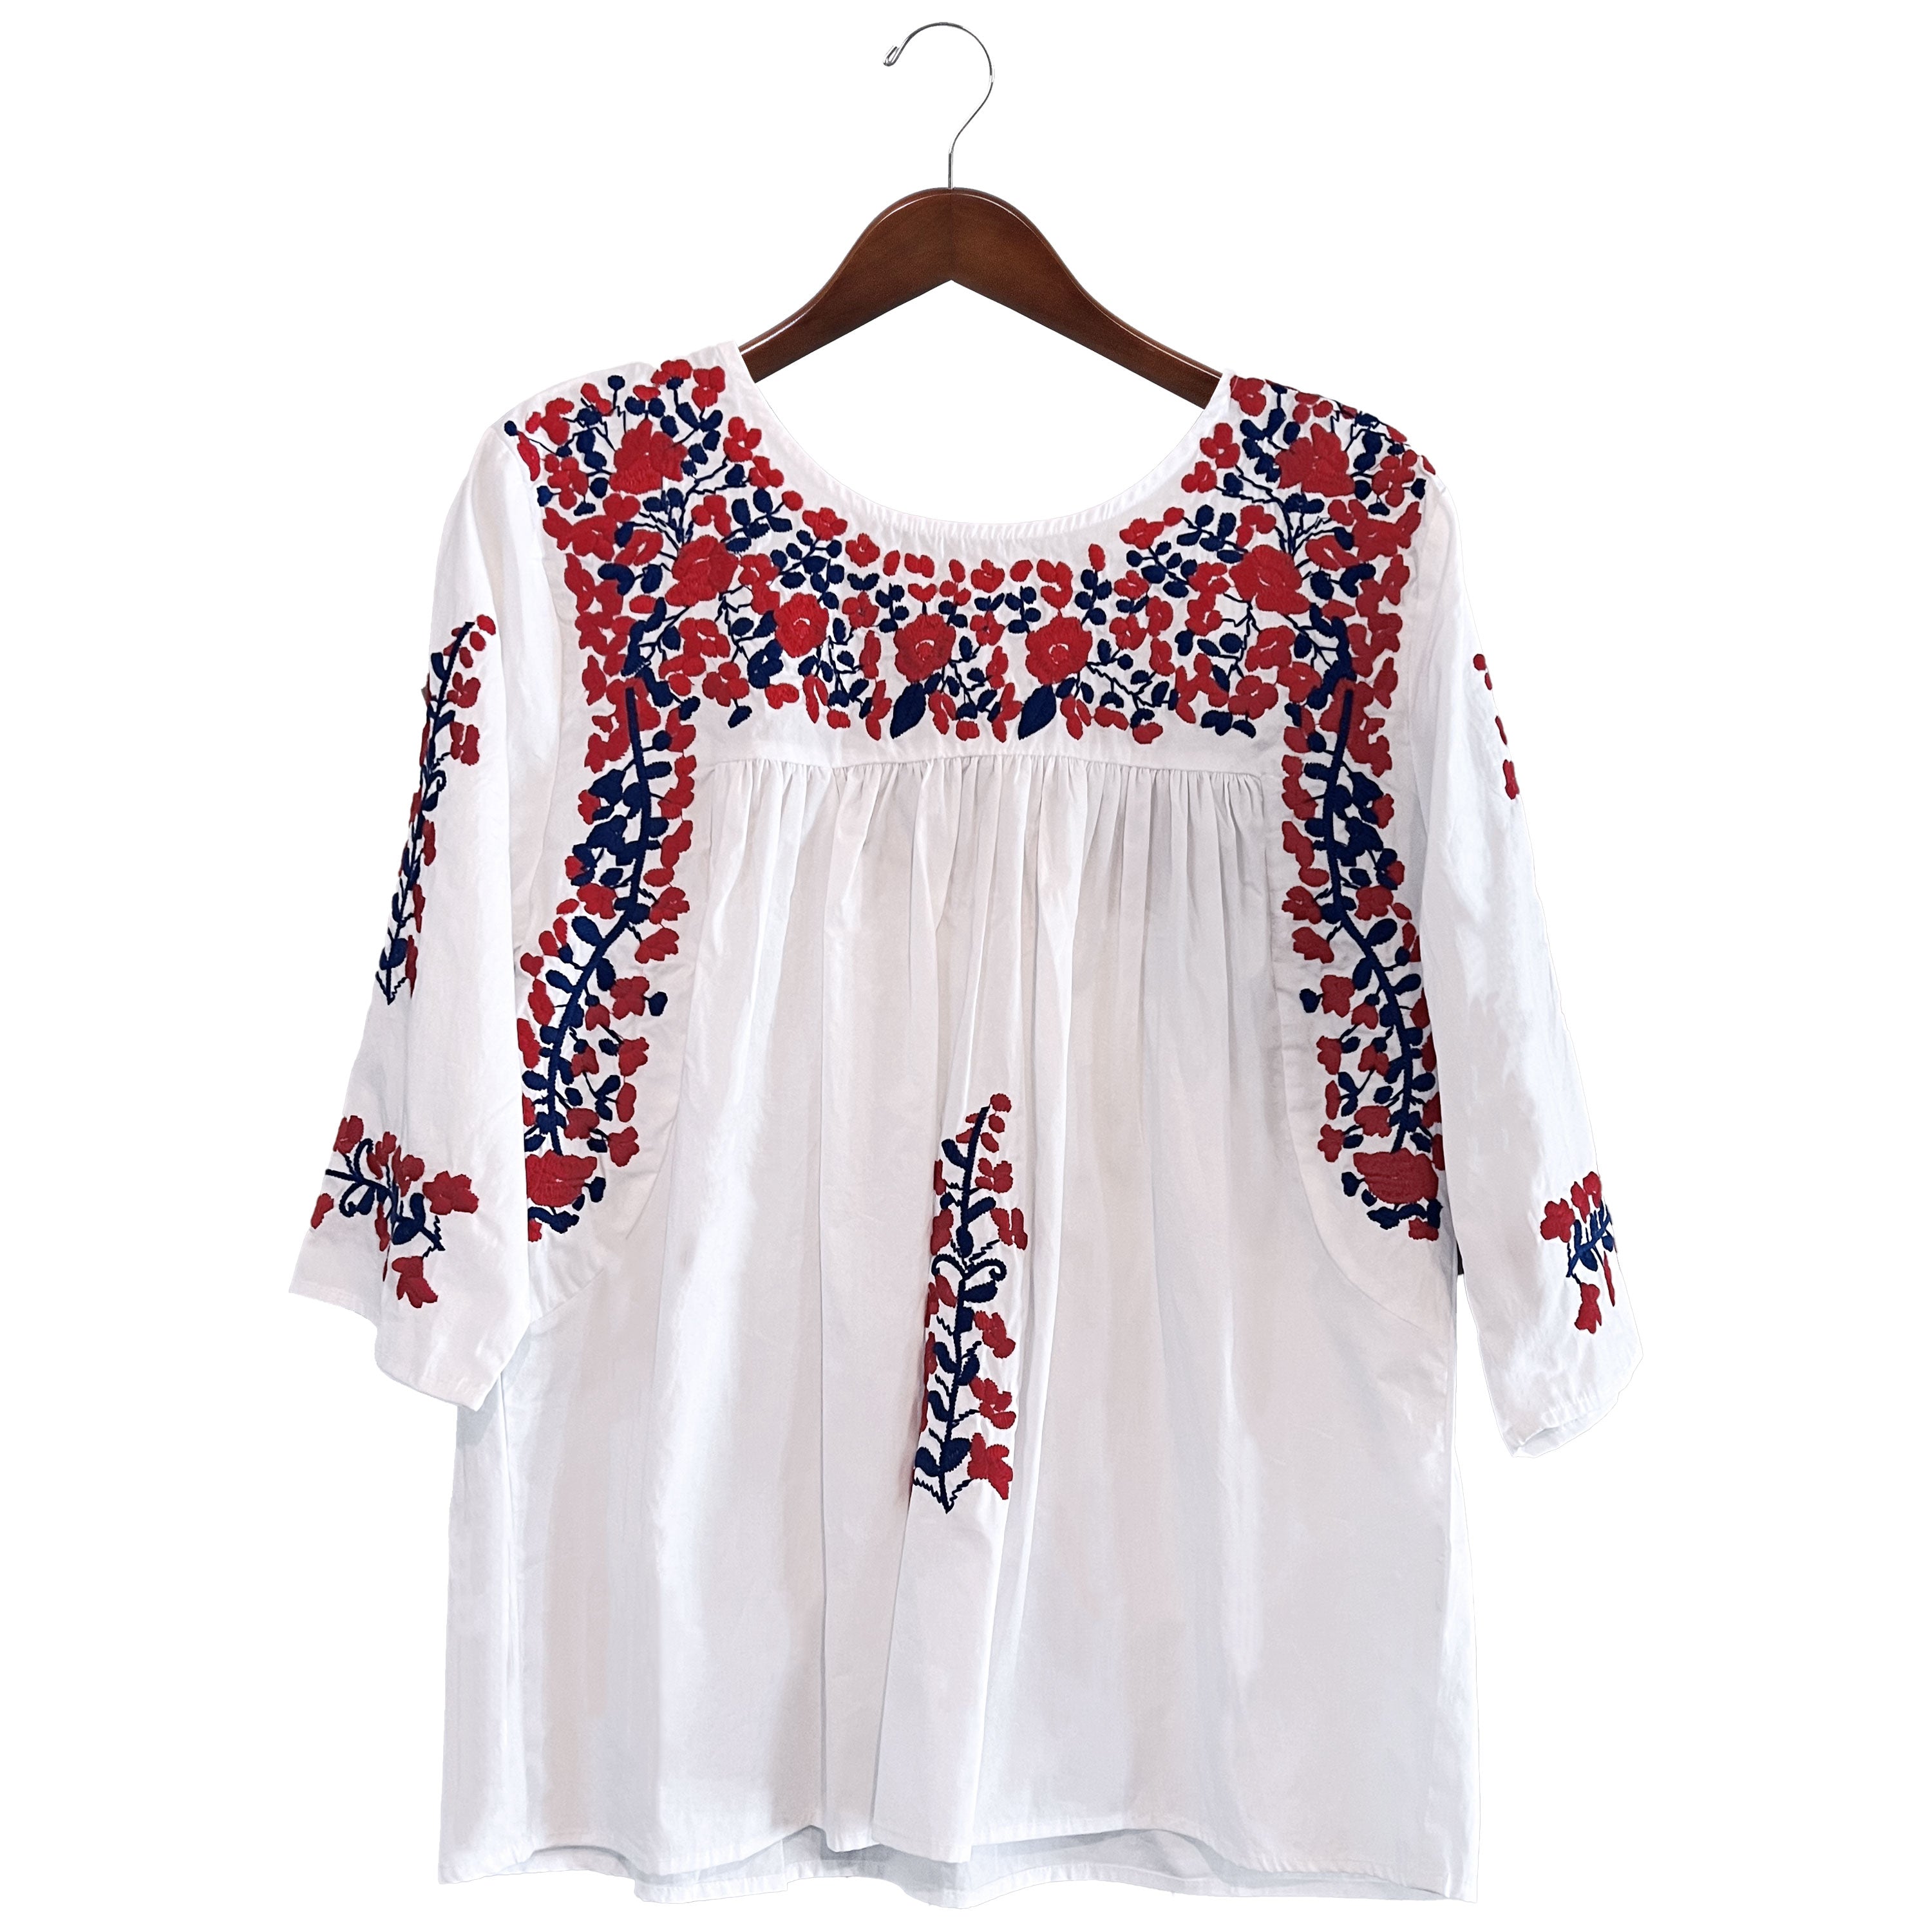 PRE-ORDER: Fourth of July White Saturday Blouse (mid-June delivery)